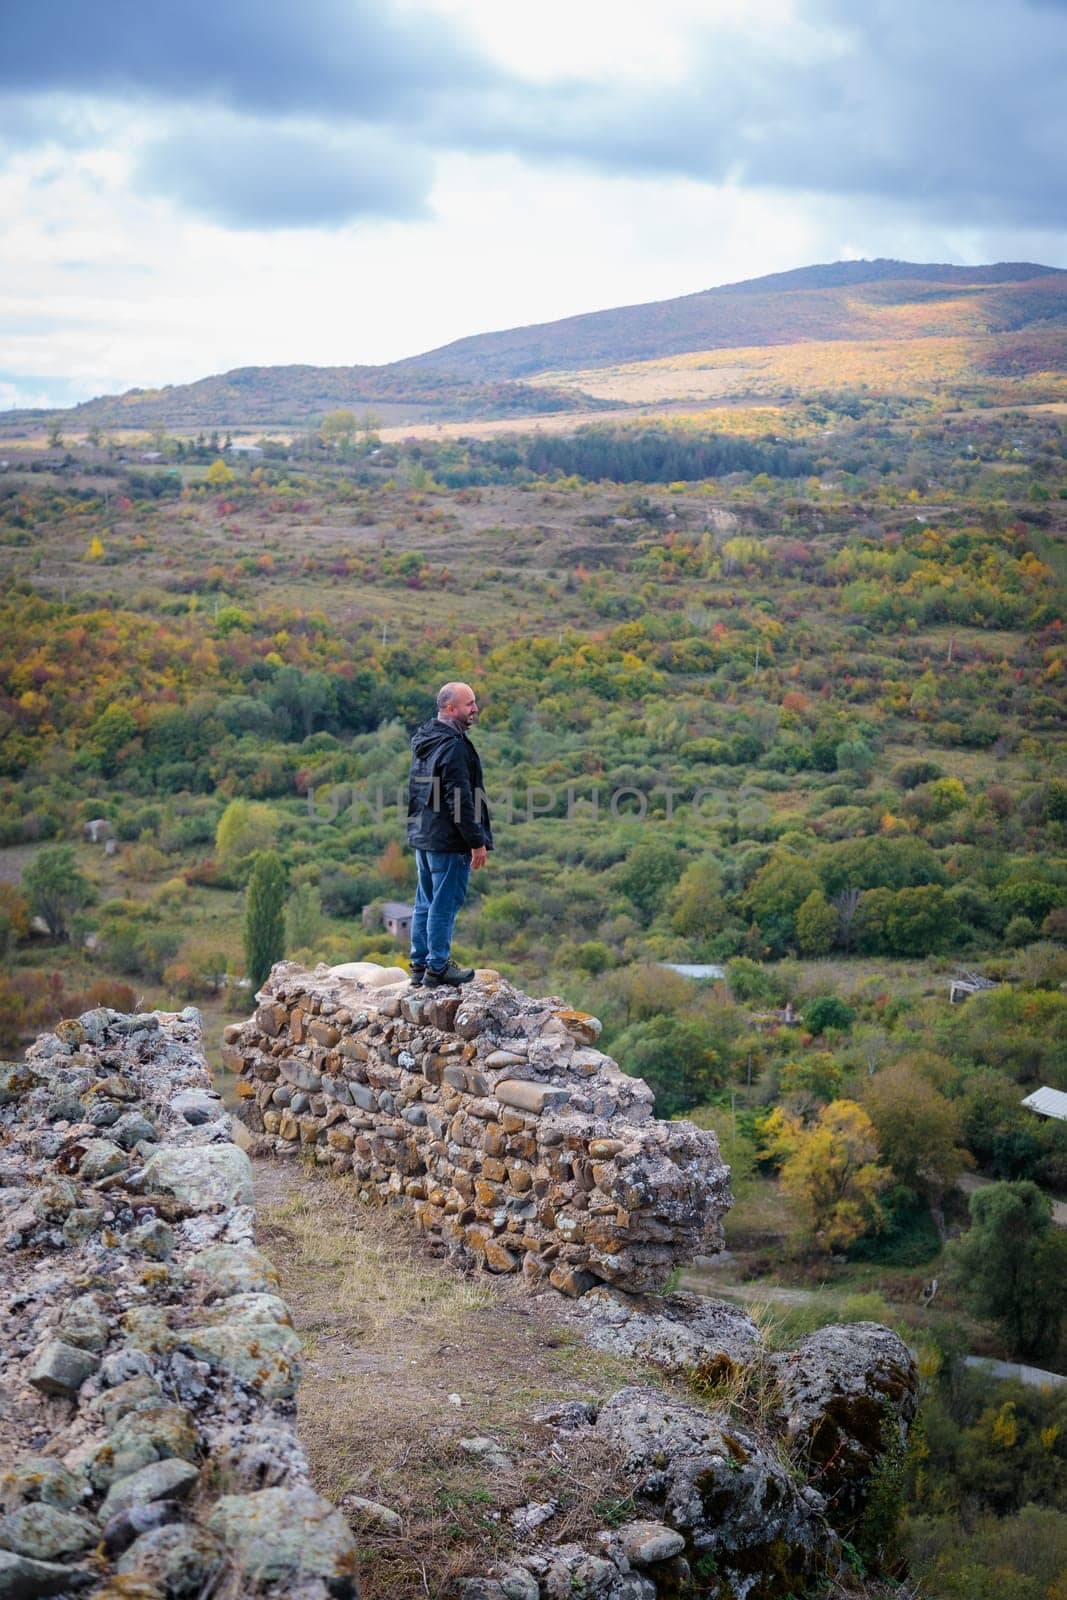 Solitary Moment: Man Standing on Mountain Fortress Ruins, Taking in the Scenery by Yurich32